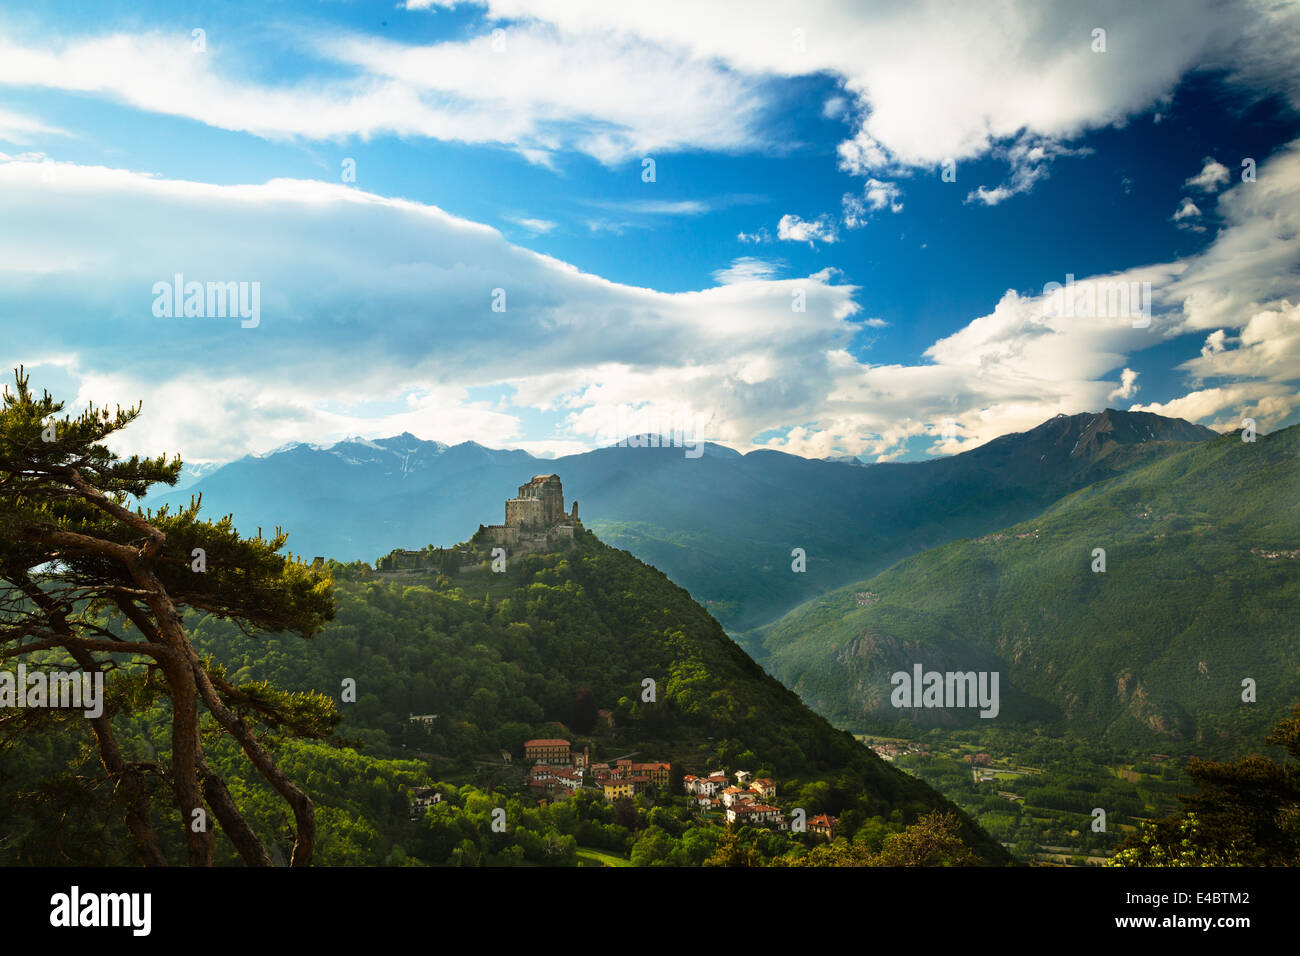 View of the monastery church of Sacra di San Michele in the Susa Valley, Piedmont, Italy. The Alps rise up in the background. Stock Photo